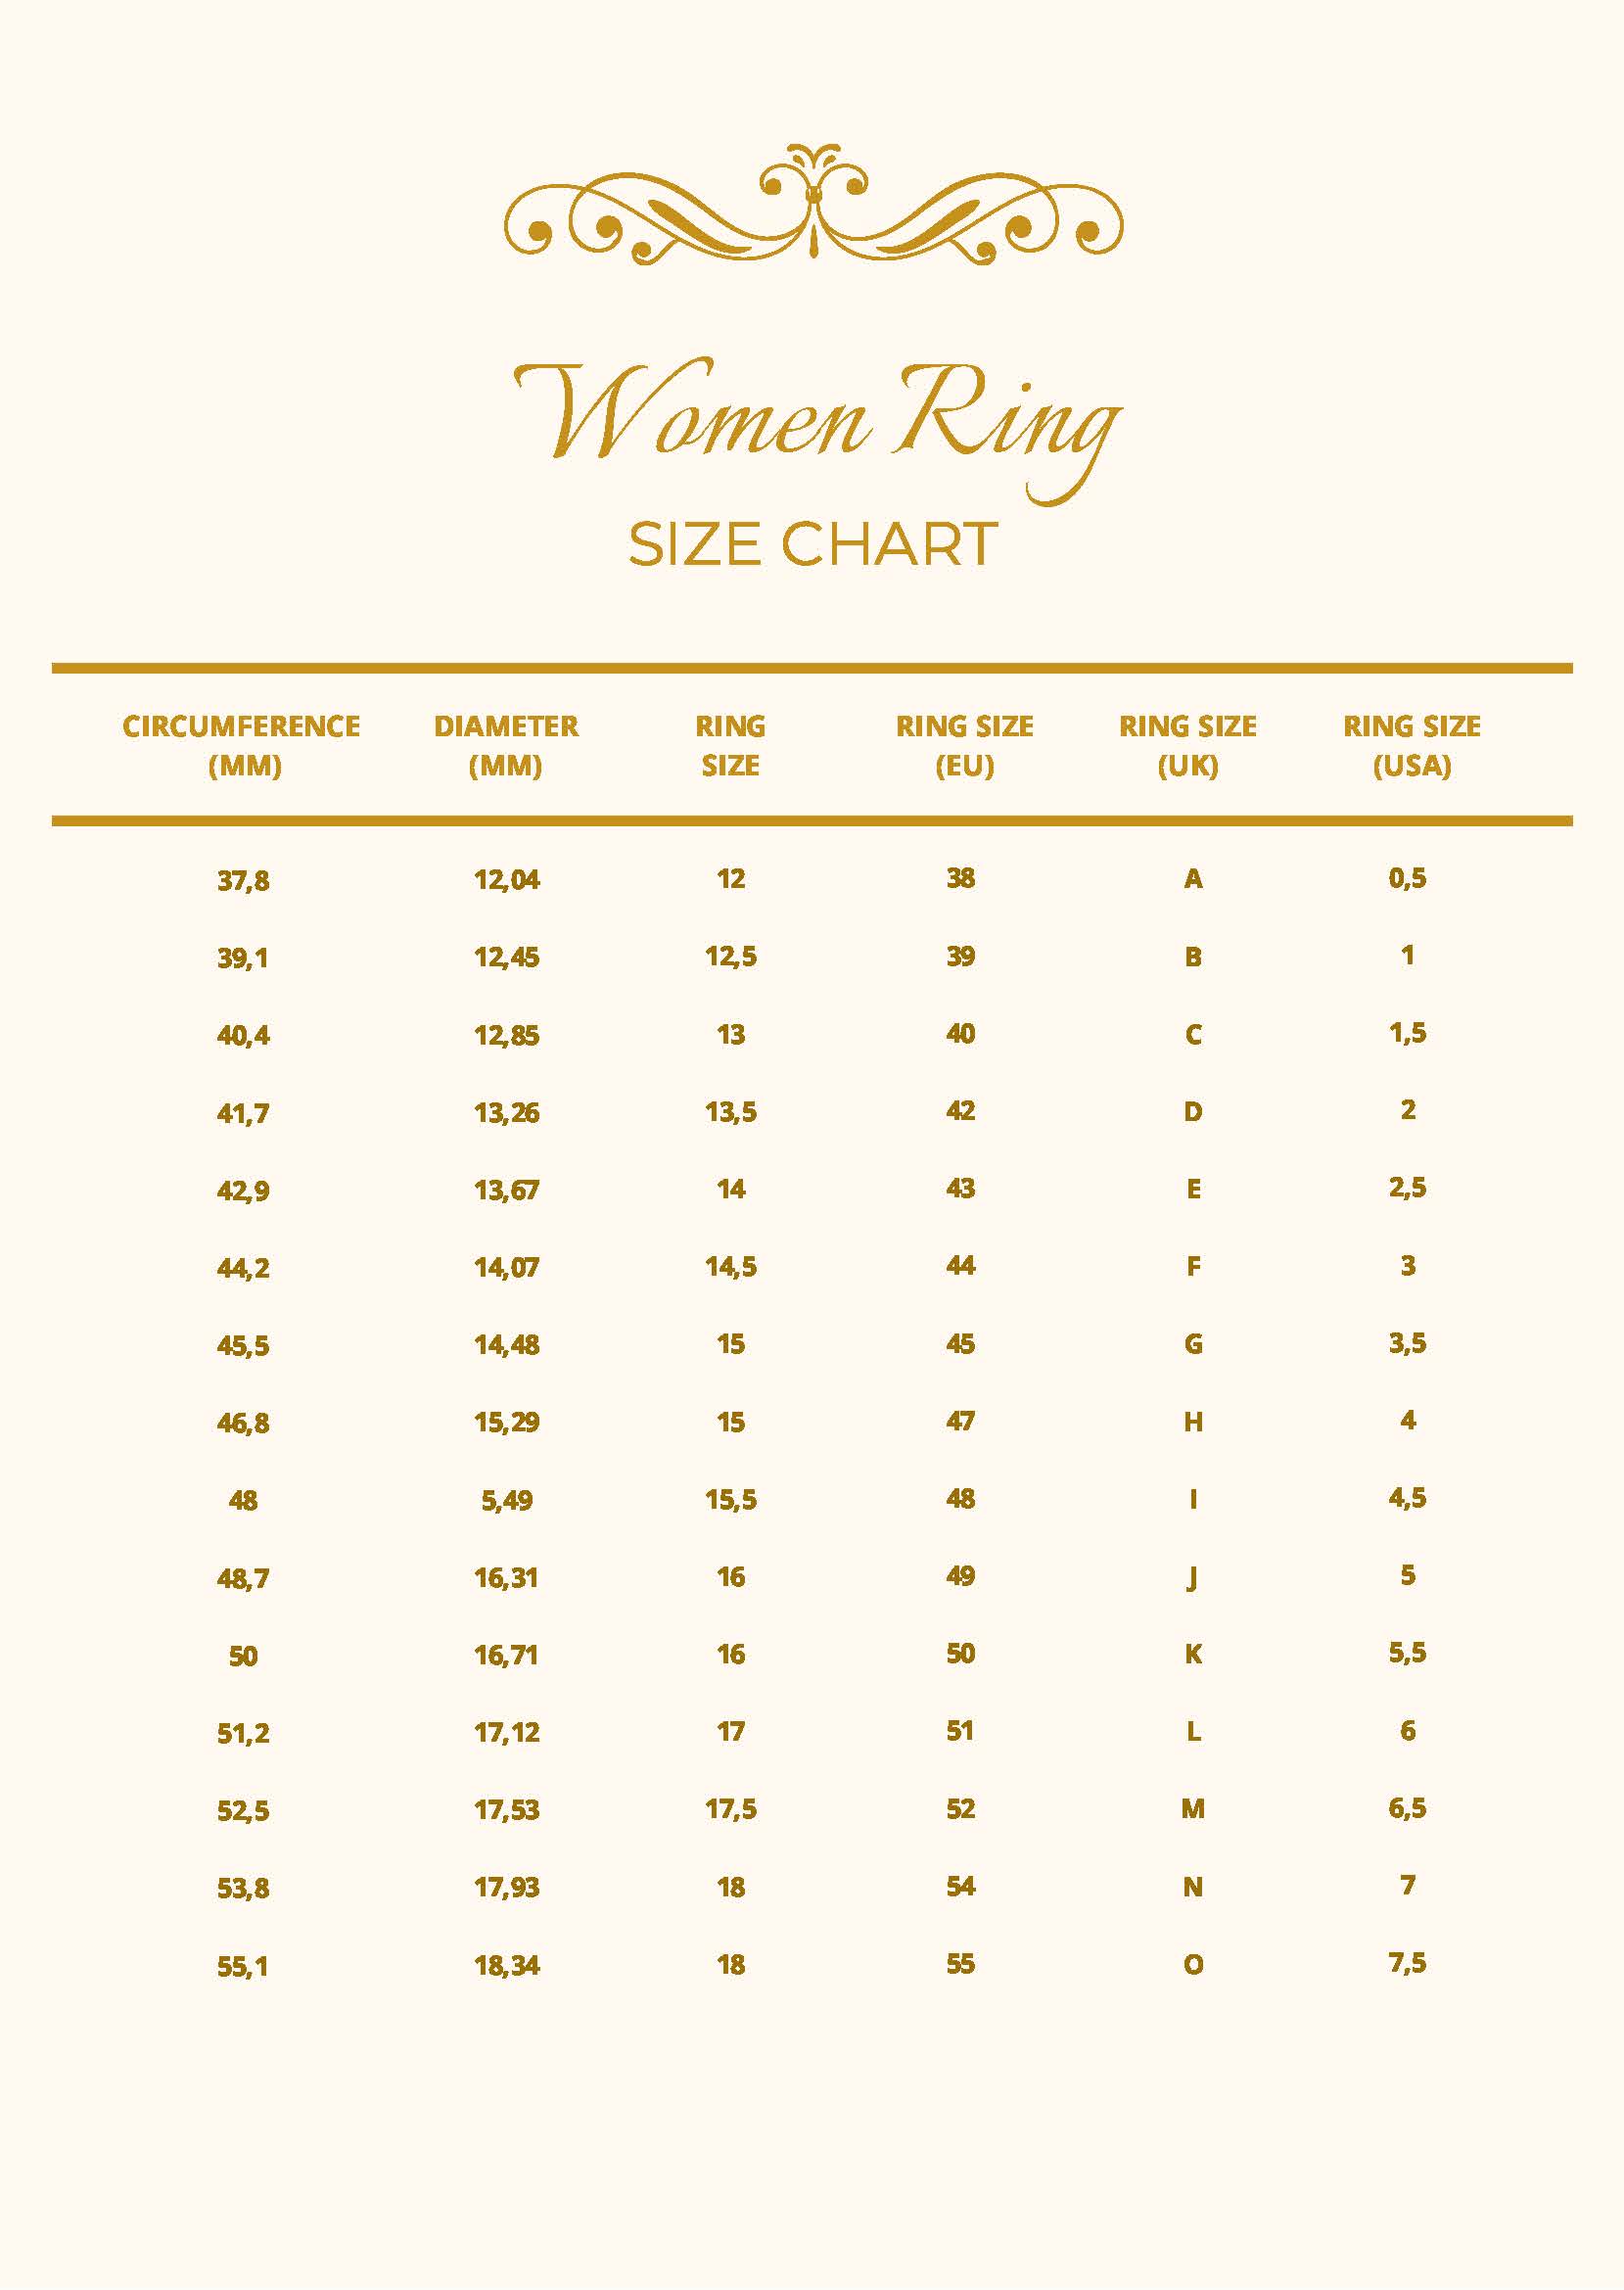 This Is the Average Ring Size for Men and Women